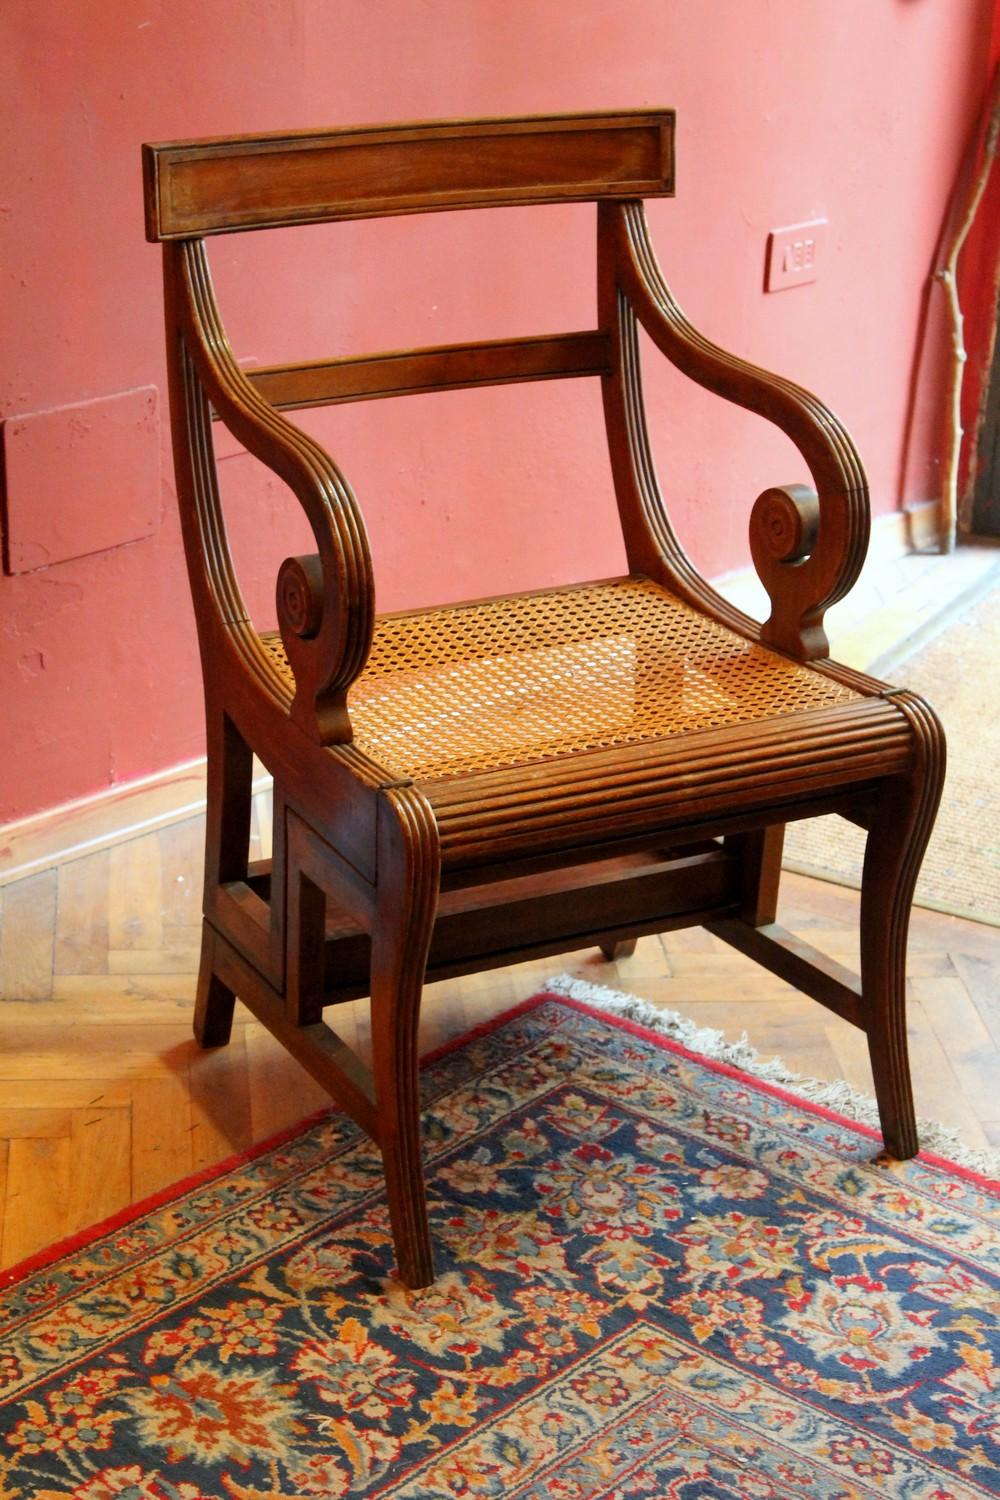 Cane seat and arched back for plenty of comfort, four steps covered with ocher yellow leather inserts turn this stable and sturdy solid 19th century mahogany armchair into a library ladder.
This Regency style metamorphic chair constructed in the